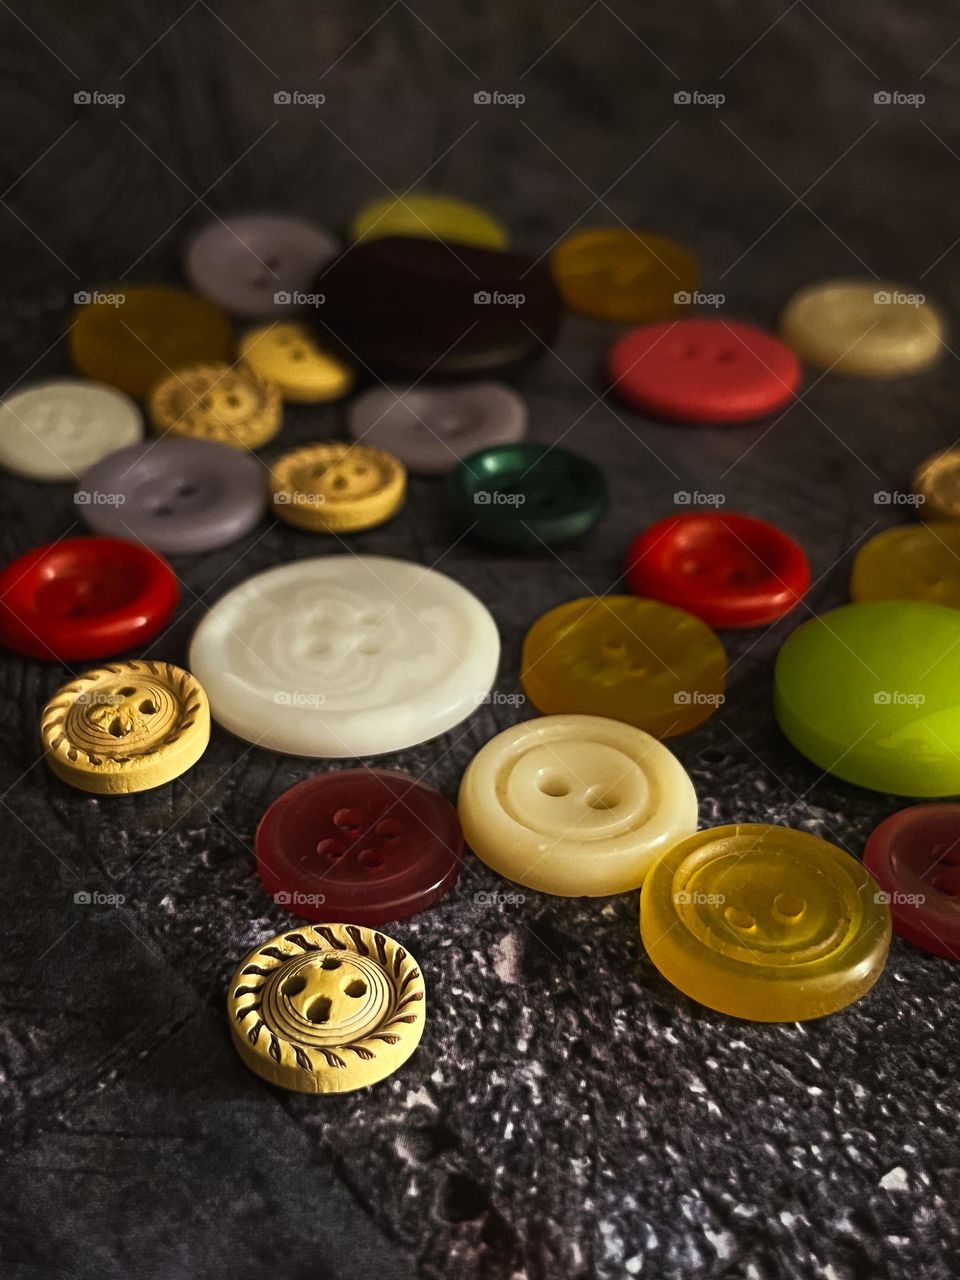 Multicolored buttons scattered on a dark background